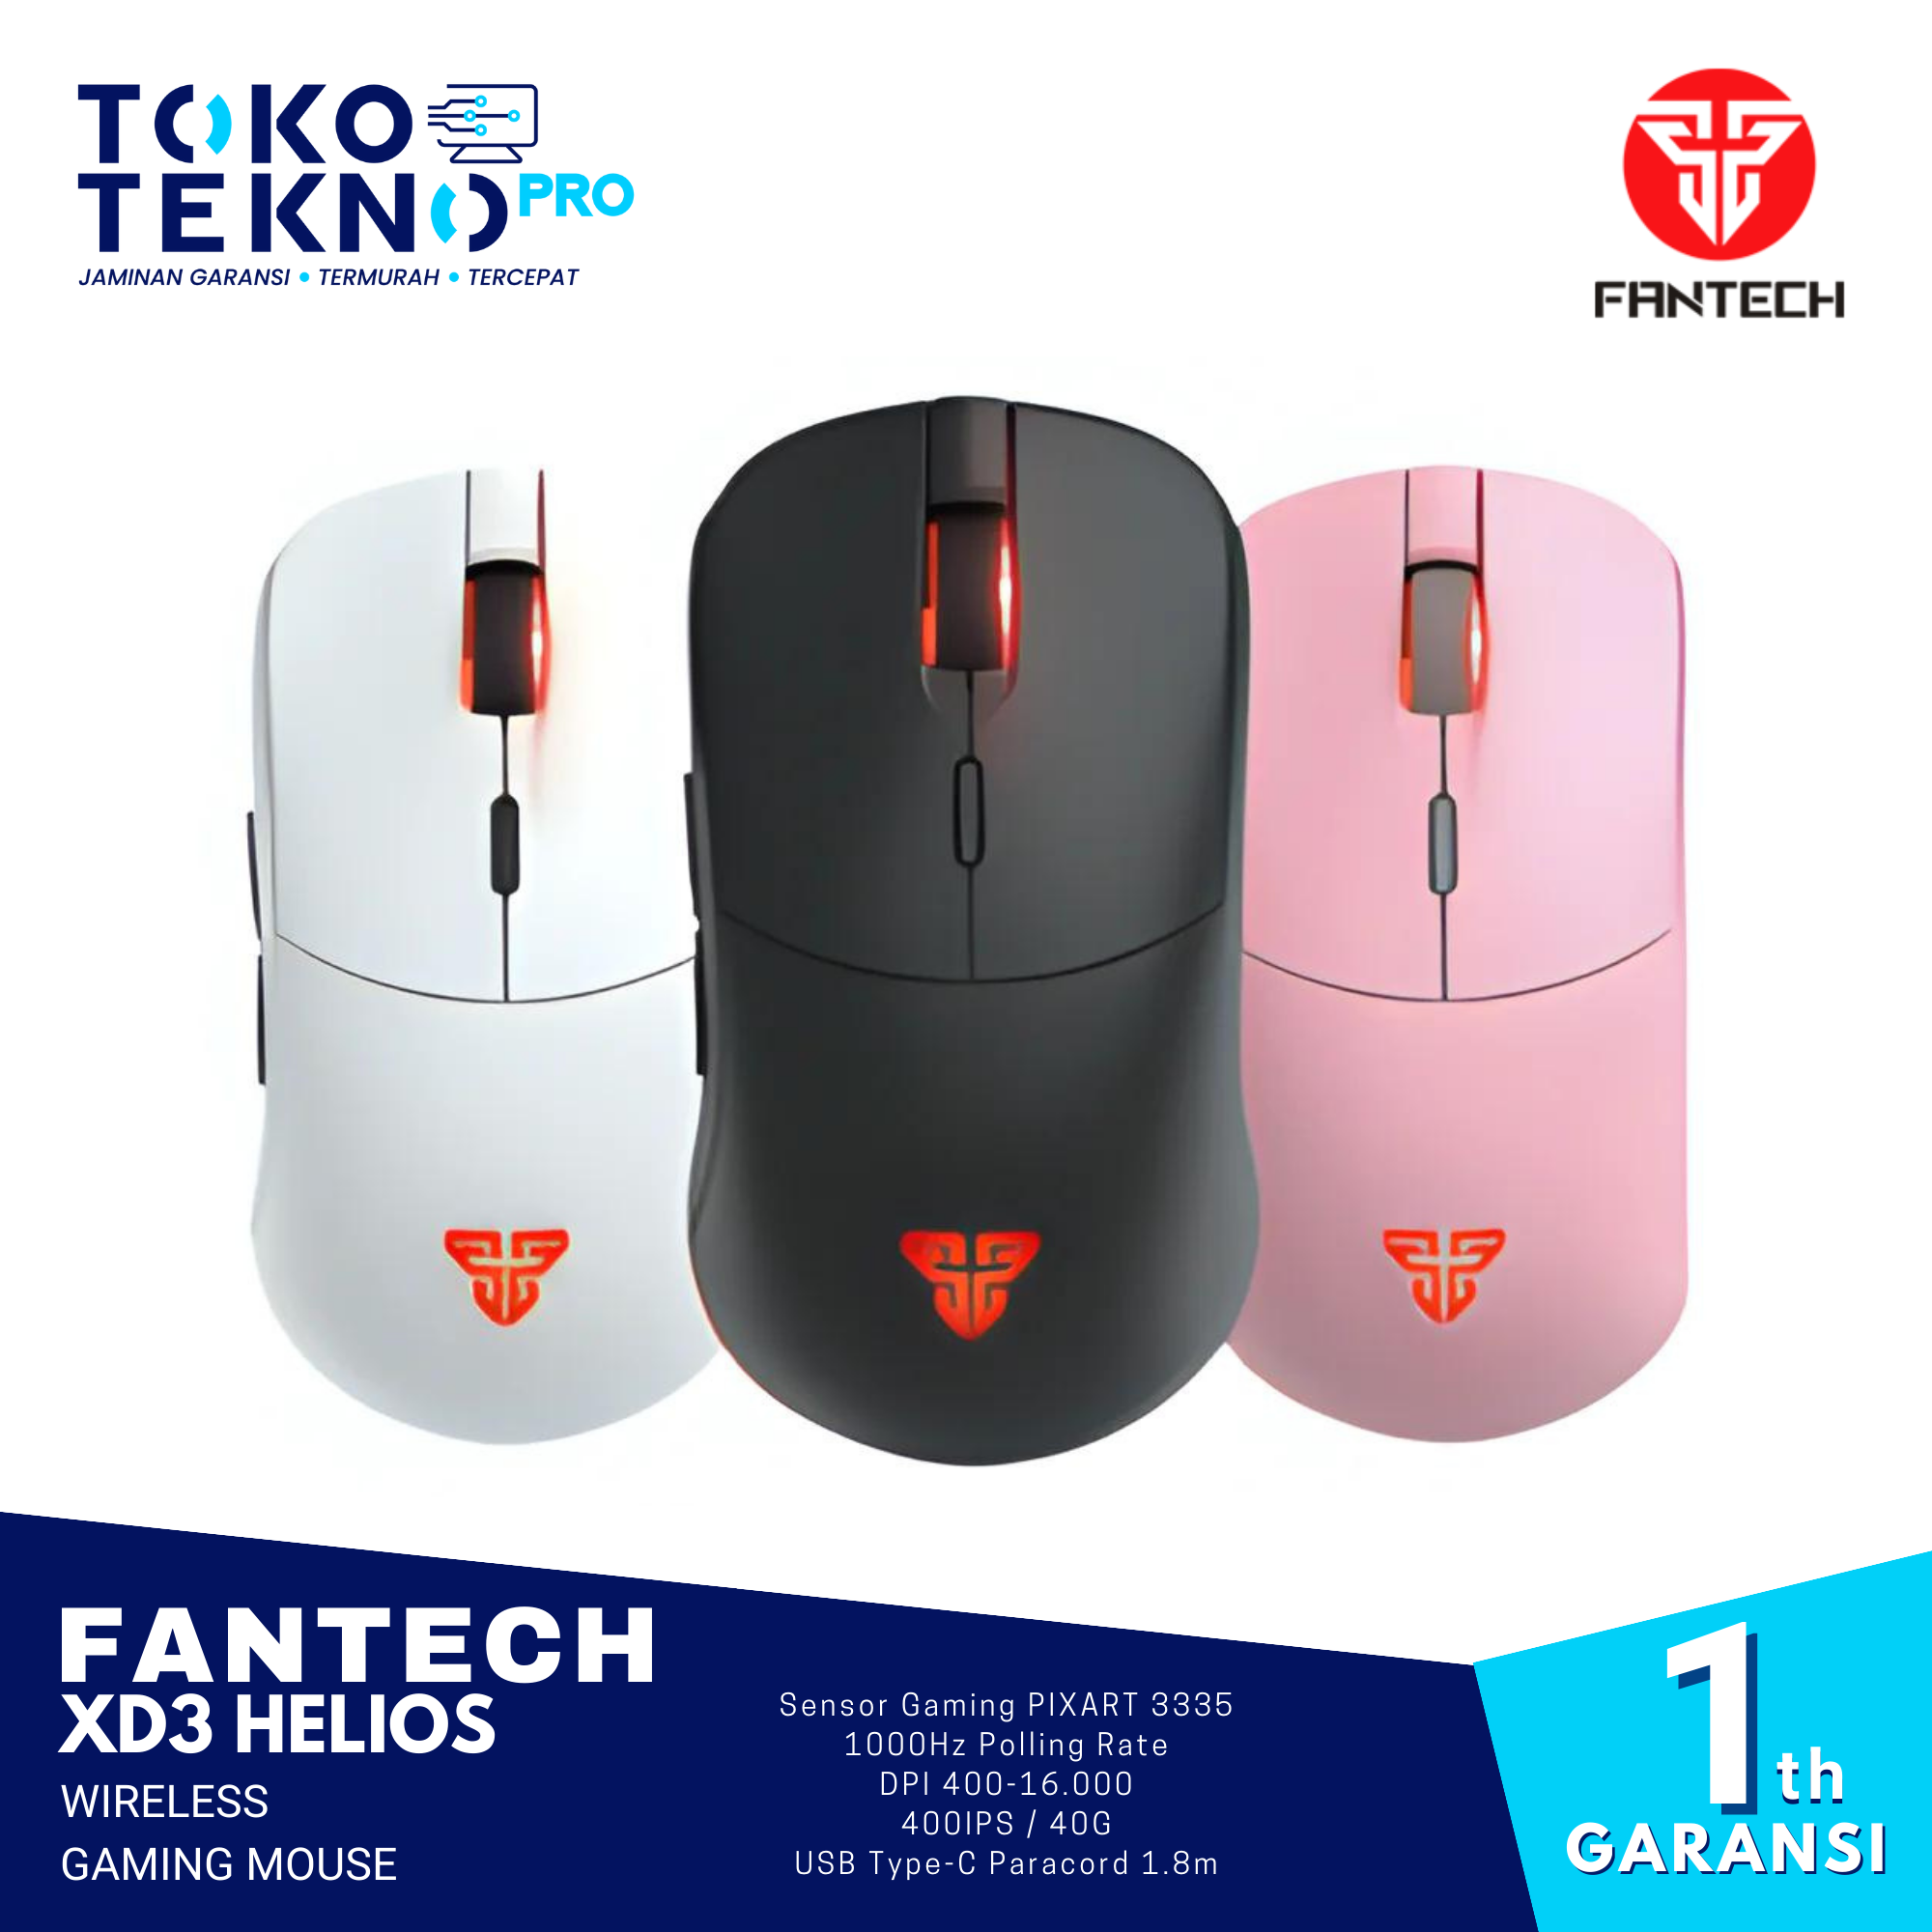 Fantech XD3 Helios Wireless Gaming Mouse